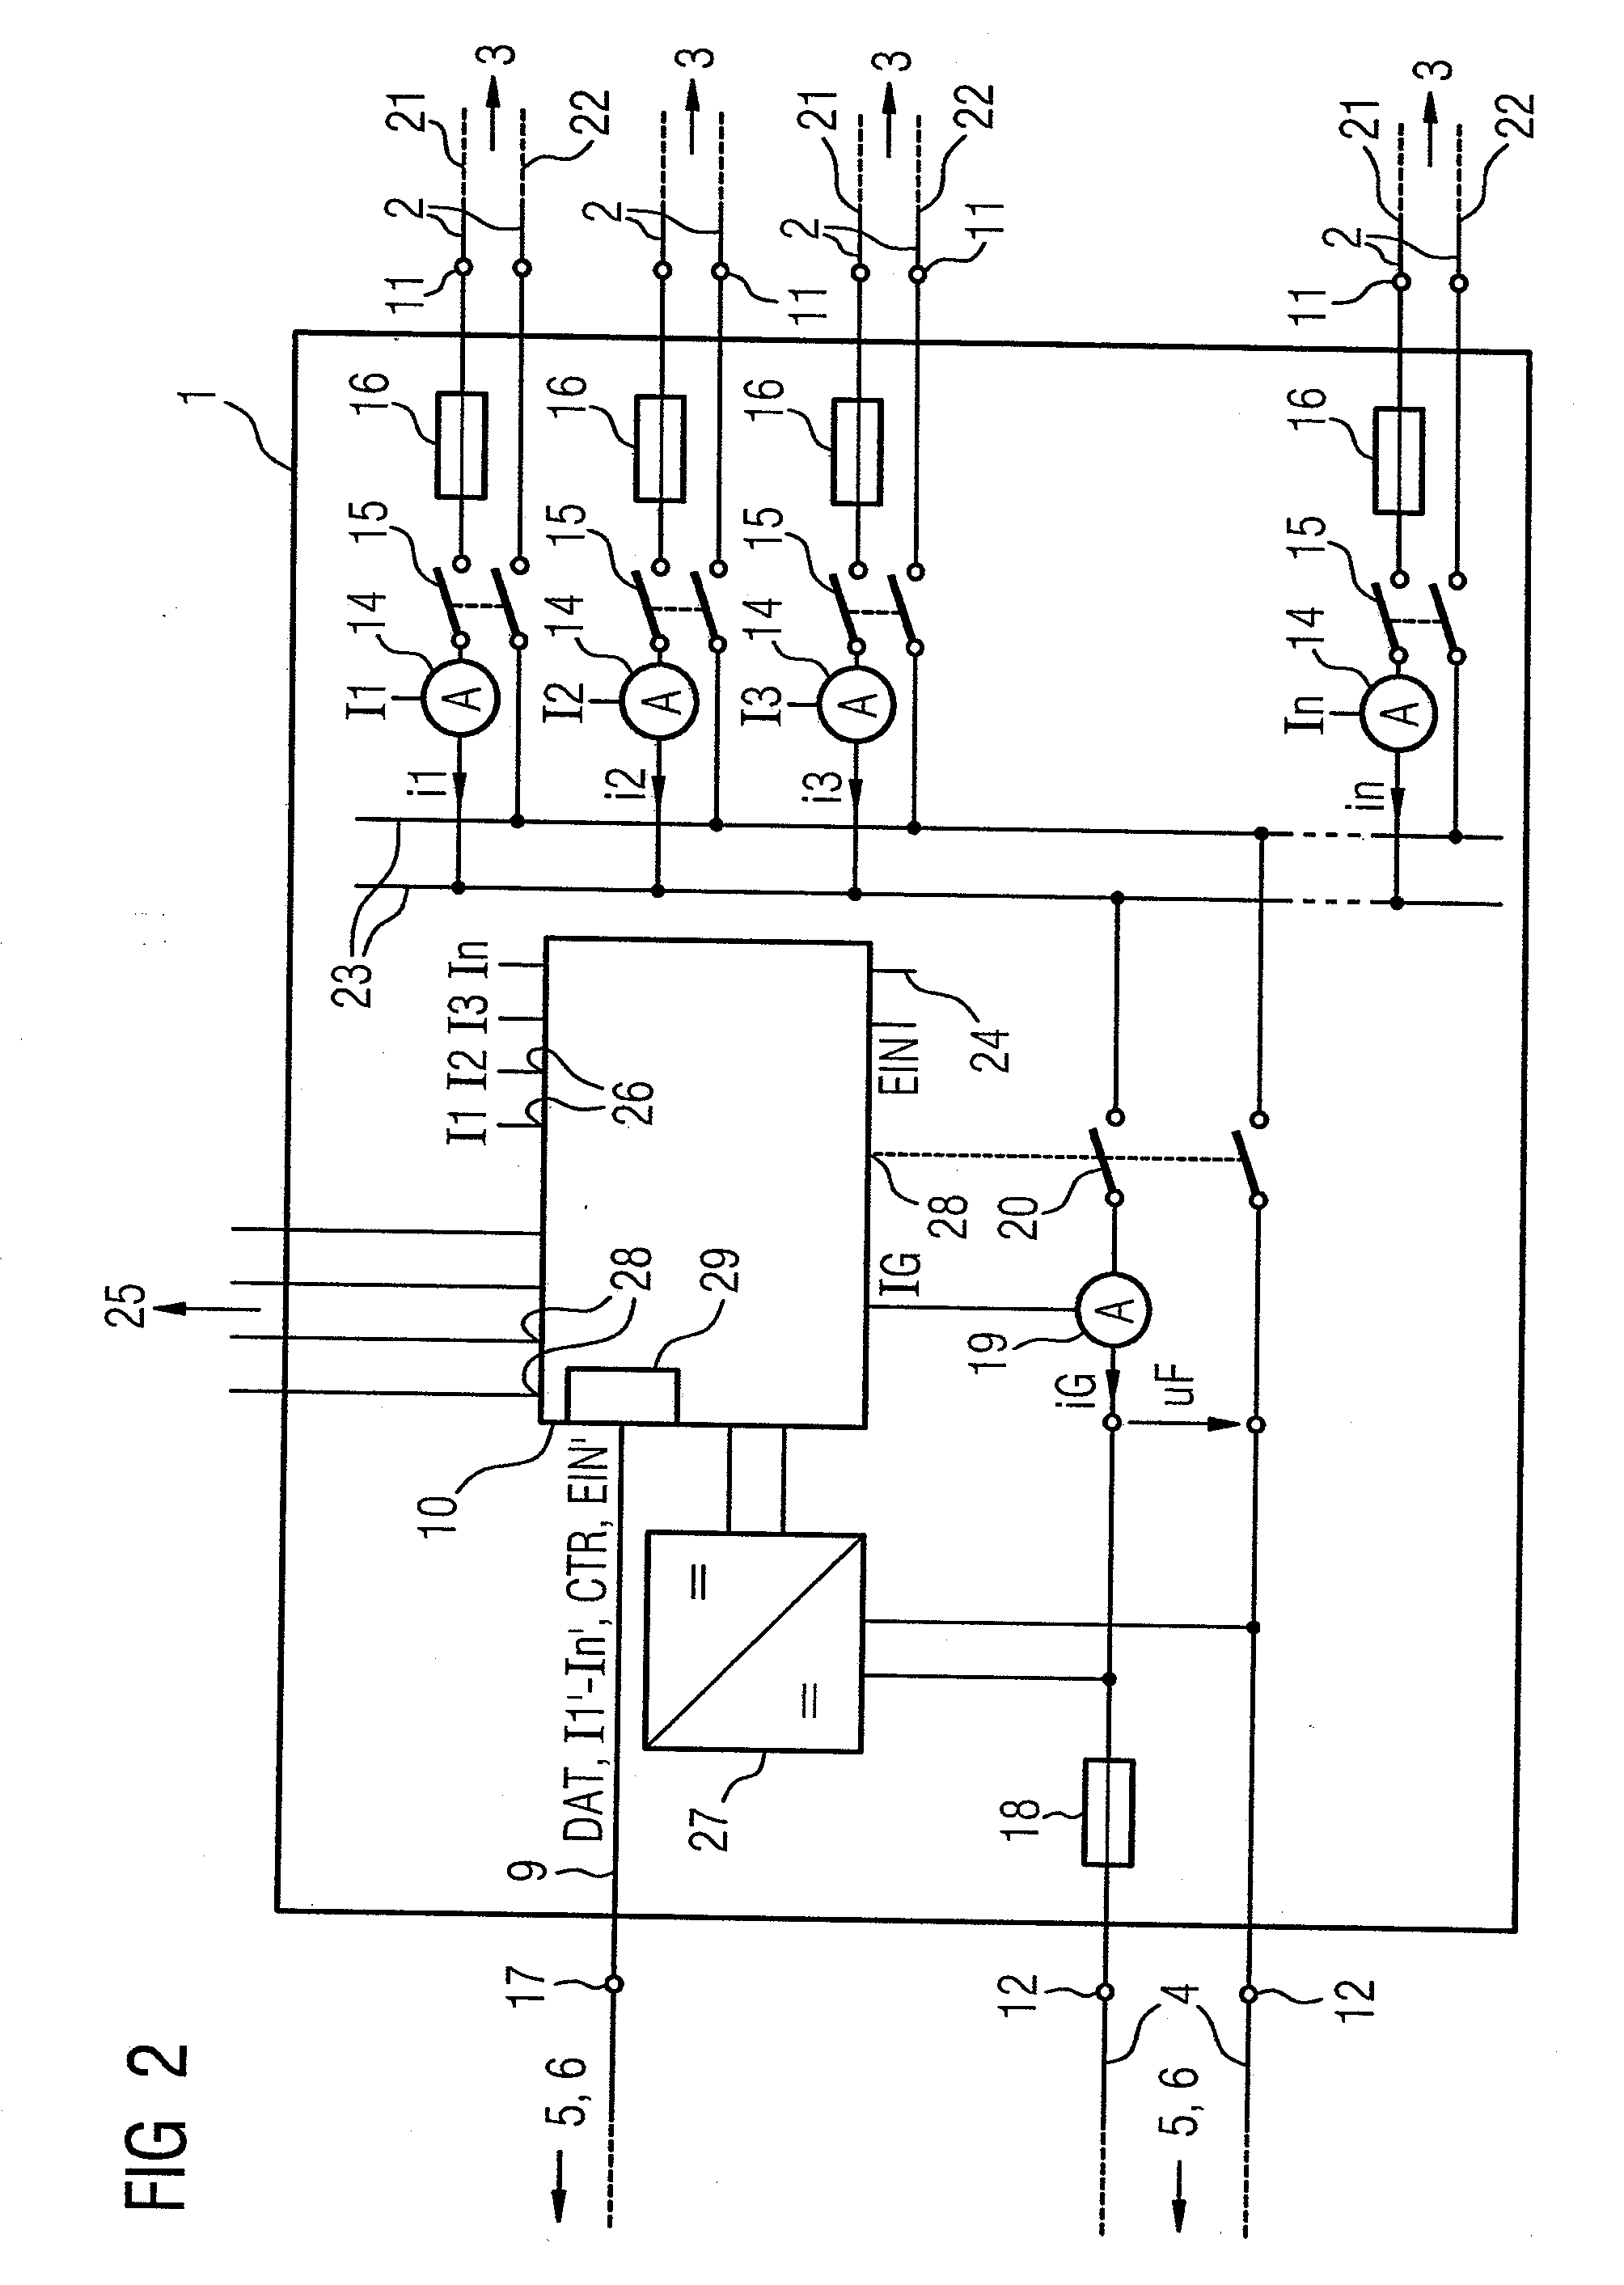 PV Sub-Generator Junction Box, PV Generator Junction Box, and PV Inverter for a PV System, and PV System